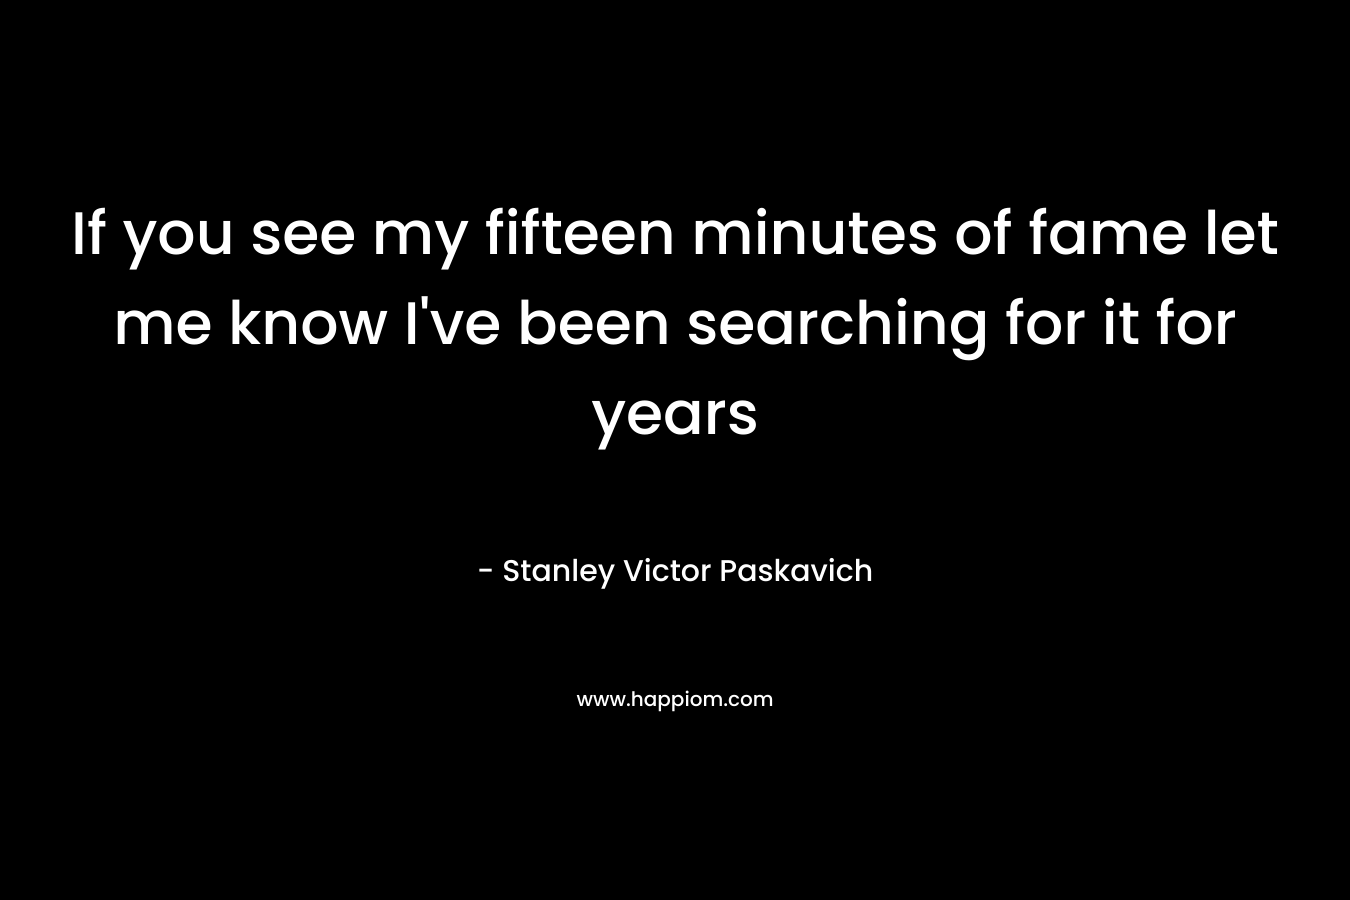 If you see my fifteen minutes of fame let me know I’ve been searching for it for years – Stanley Victor Paskavich